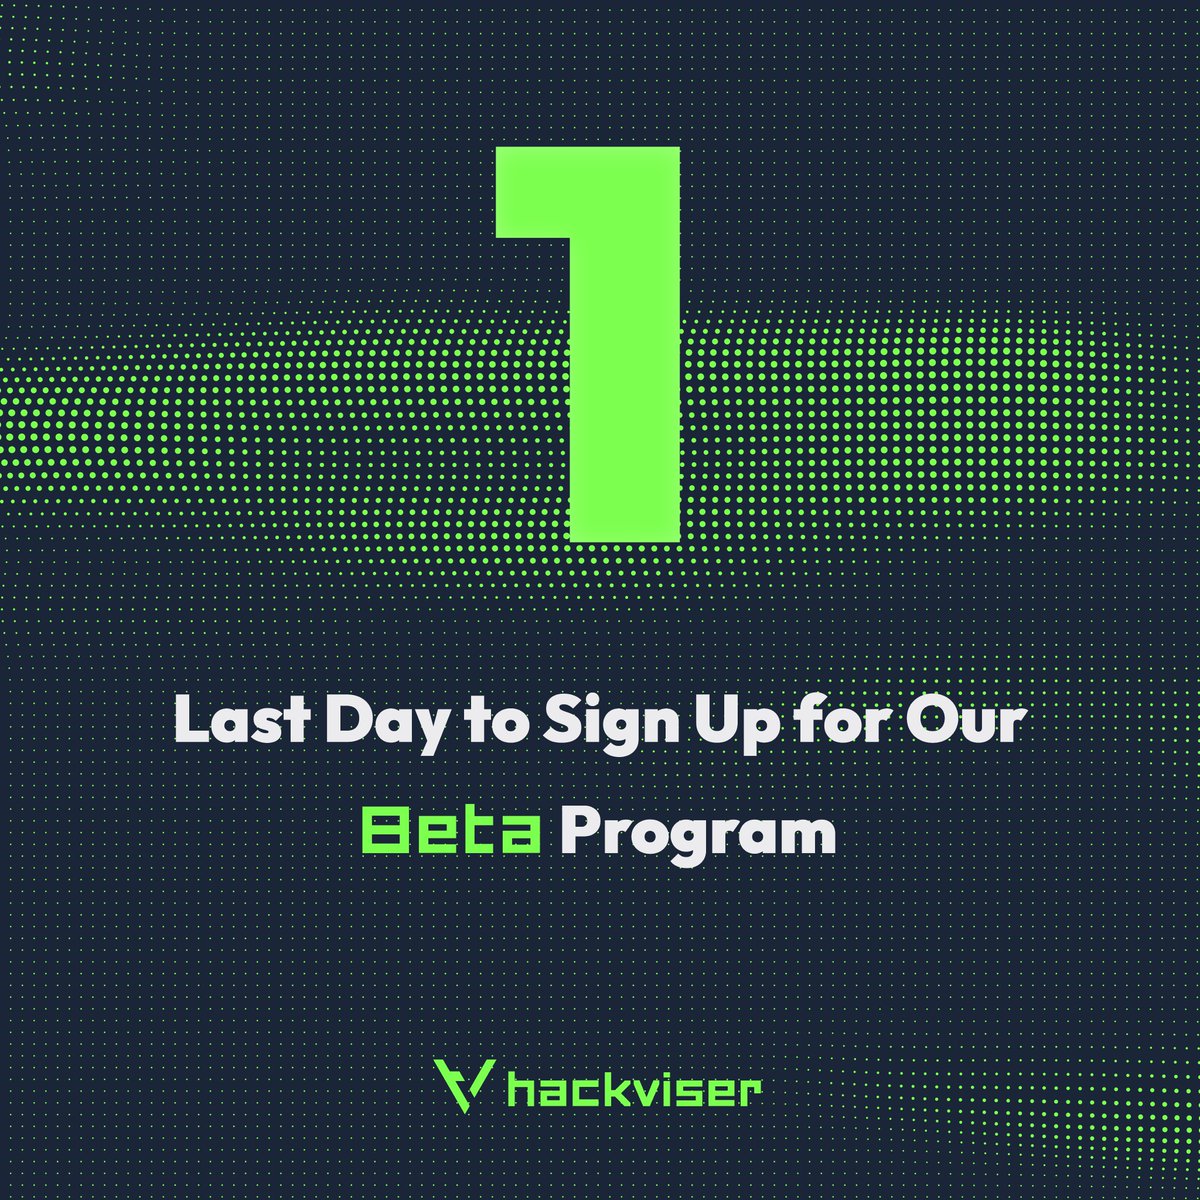 The applications for the beta program will close tonight at 23:59 UTC.

If you haven't signed up yet, don't forget to apply for the beta program!
🔗 hackviser.com

#cybersecurity #cyberrange